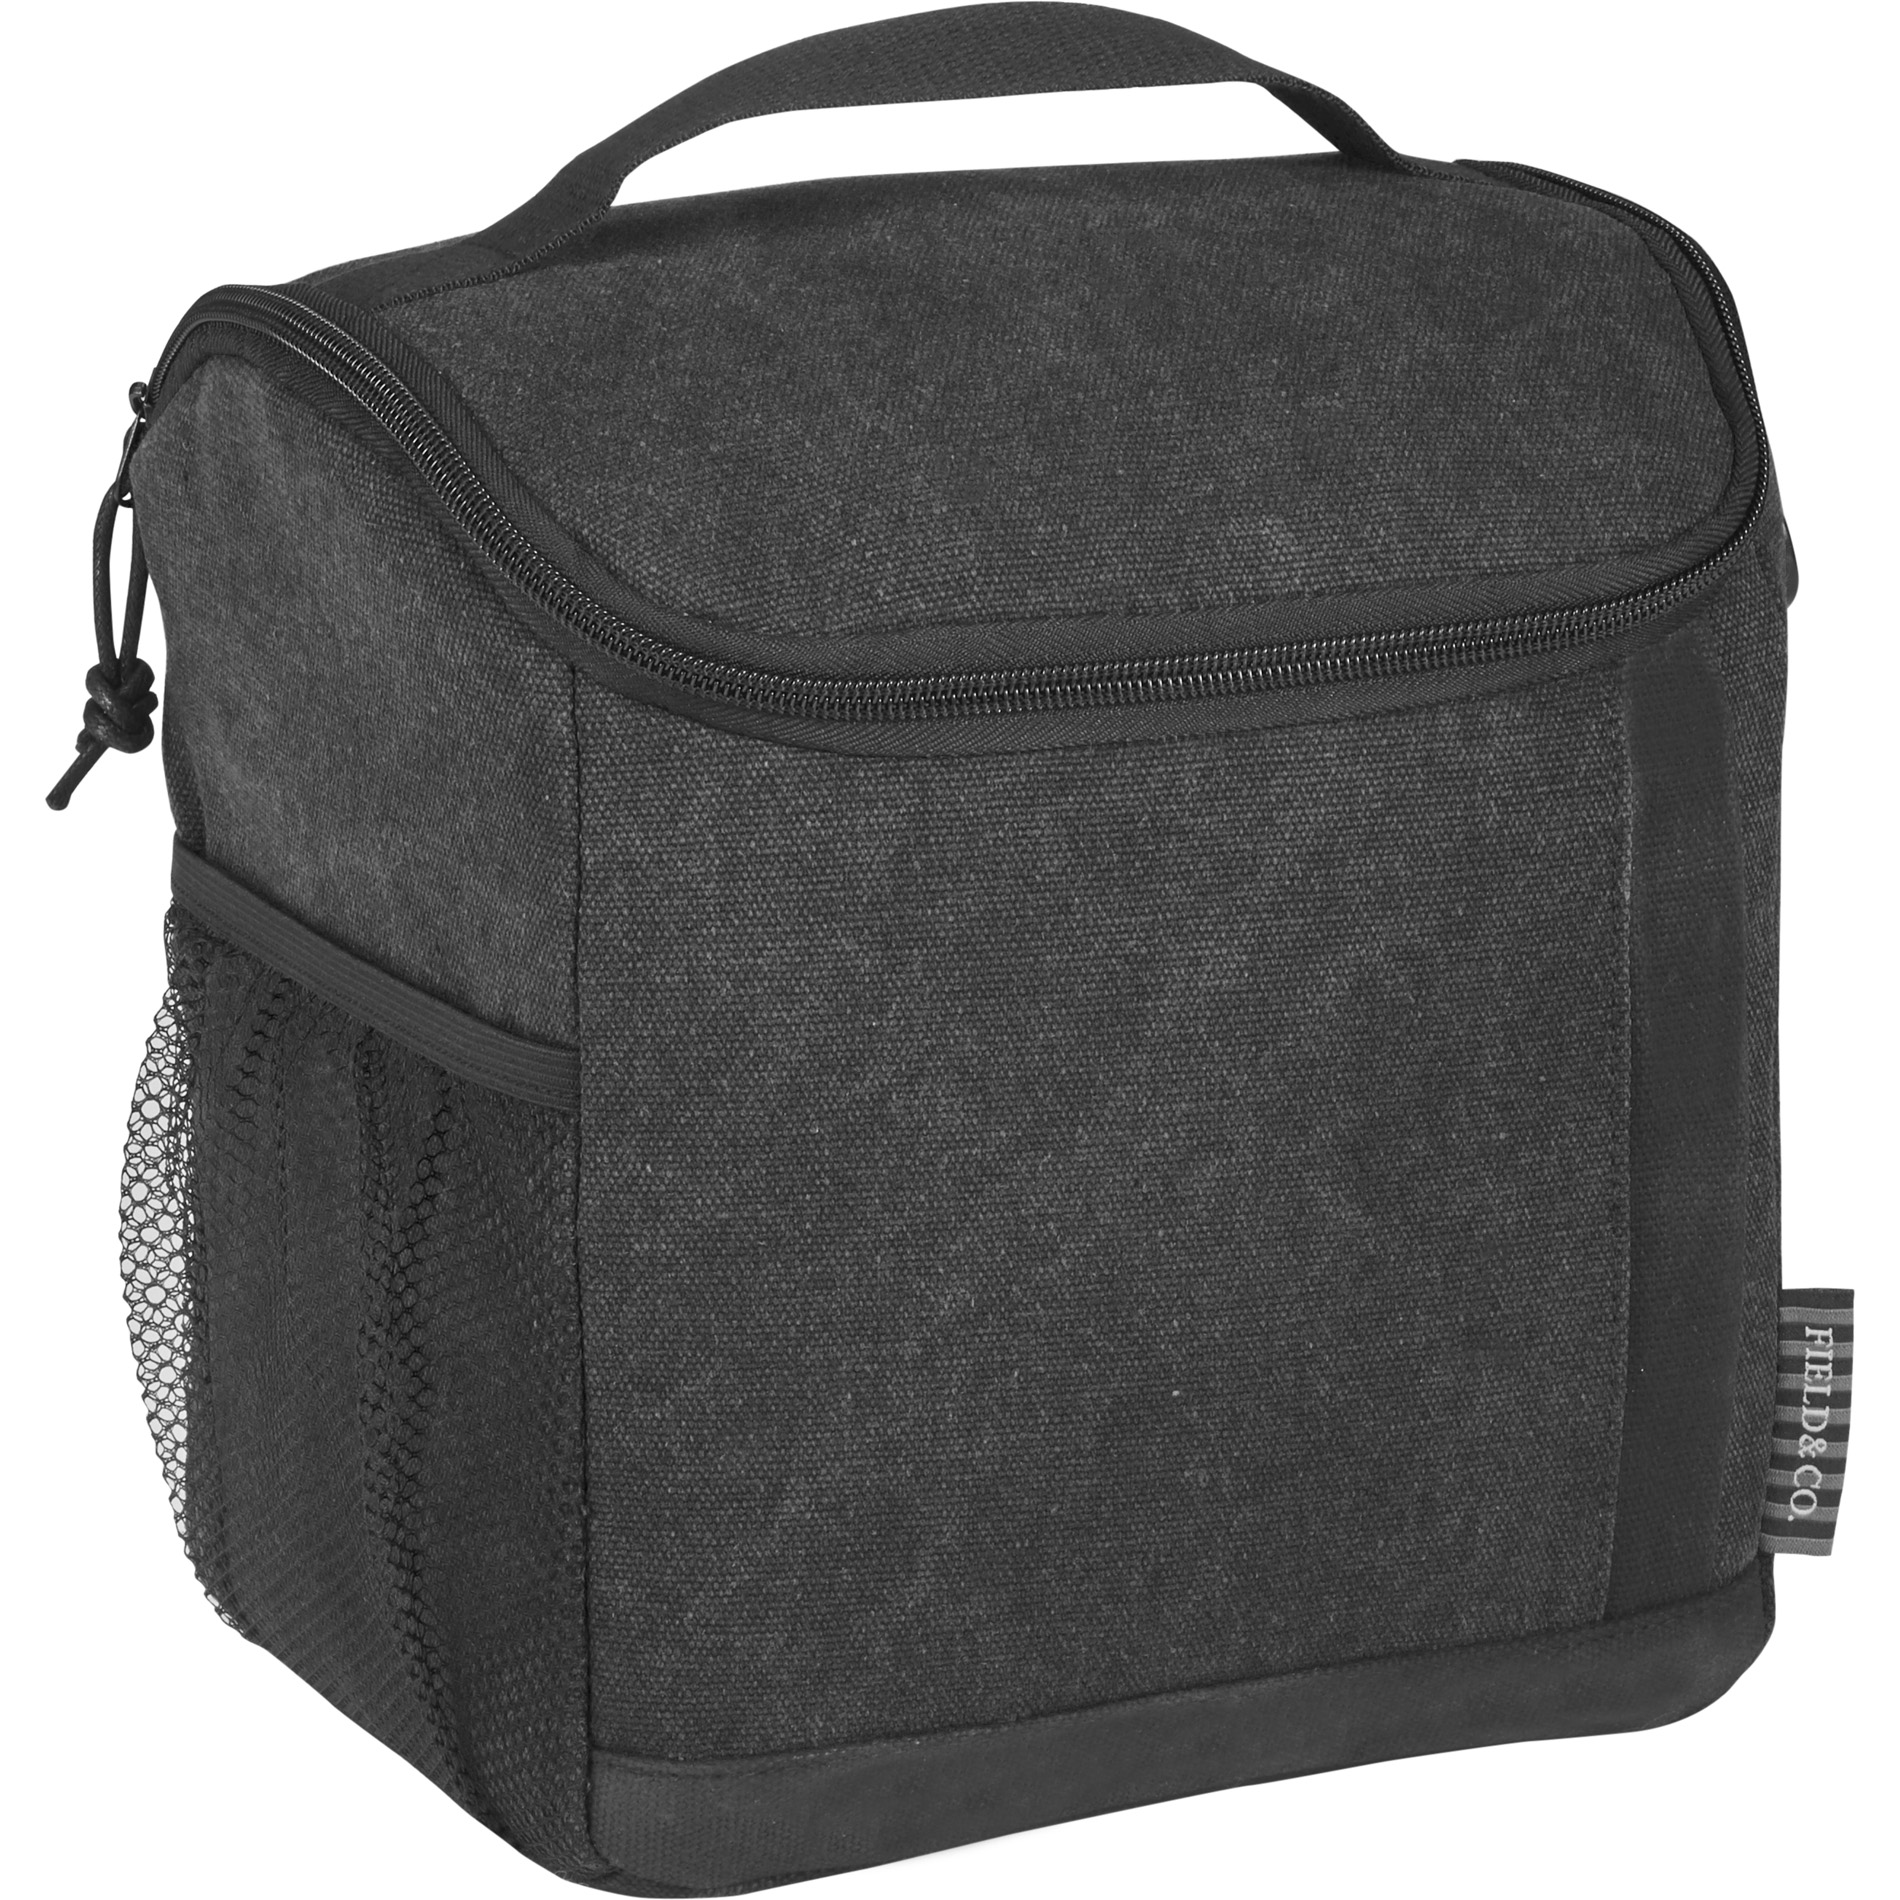 Field & Co. 7590-04 - Woodland 6 Can Lunch Cooler